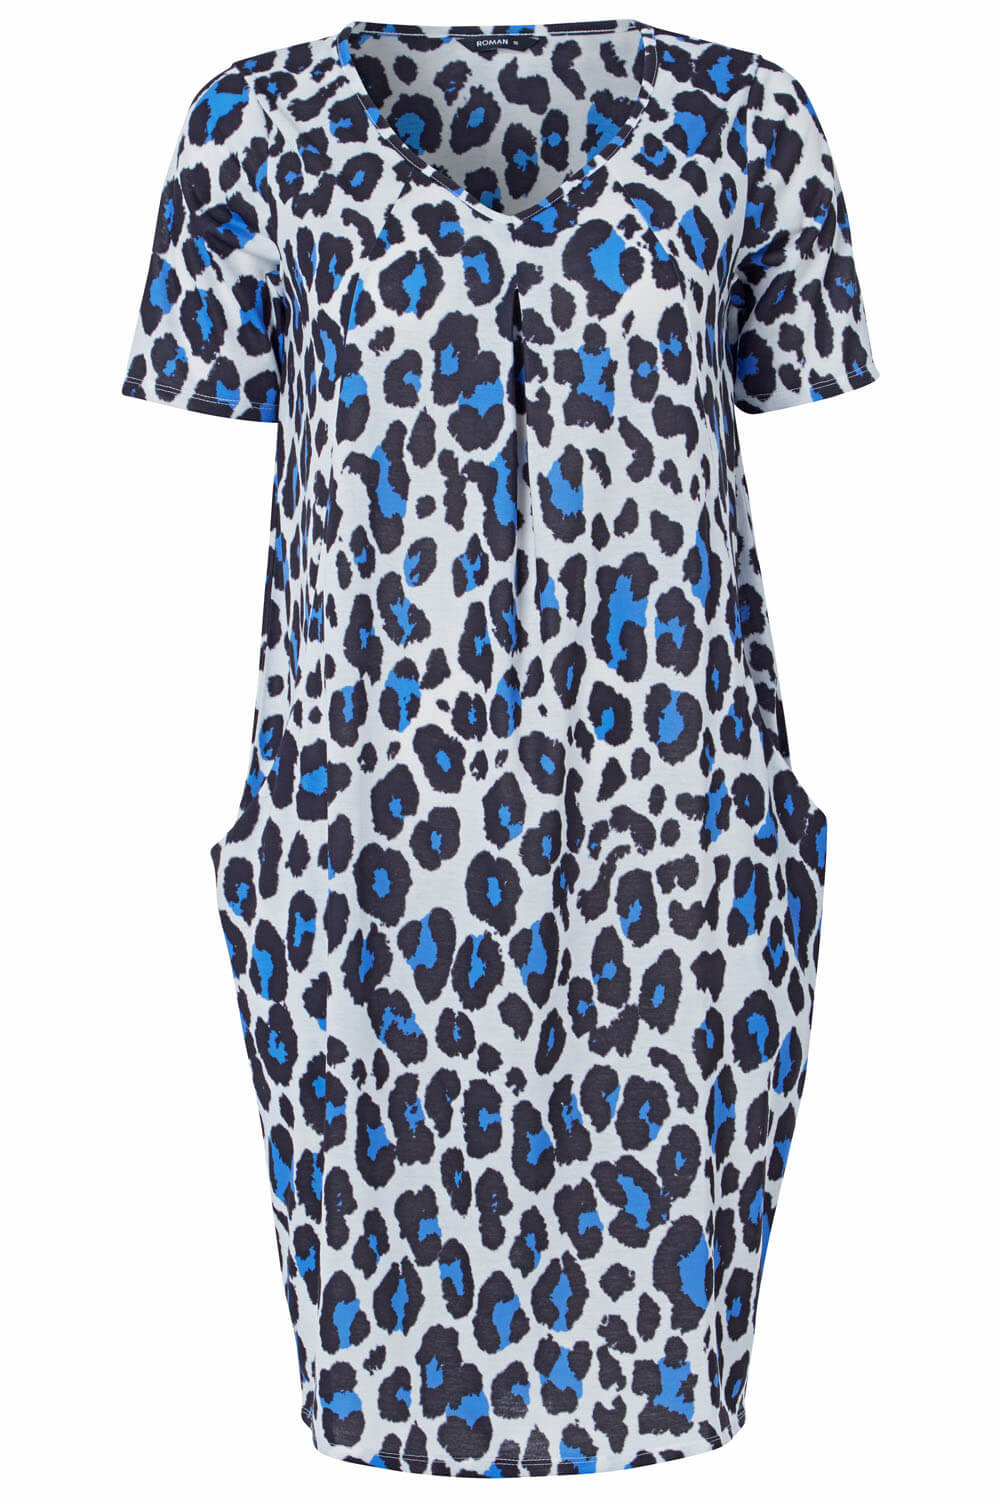 Blue Animal Print Slouch Dress , Image 5 of 5